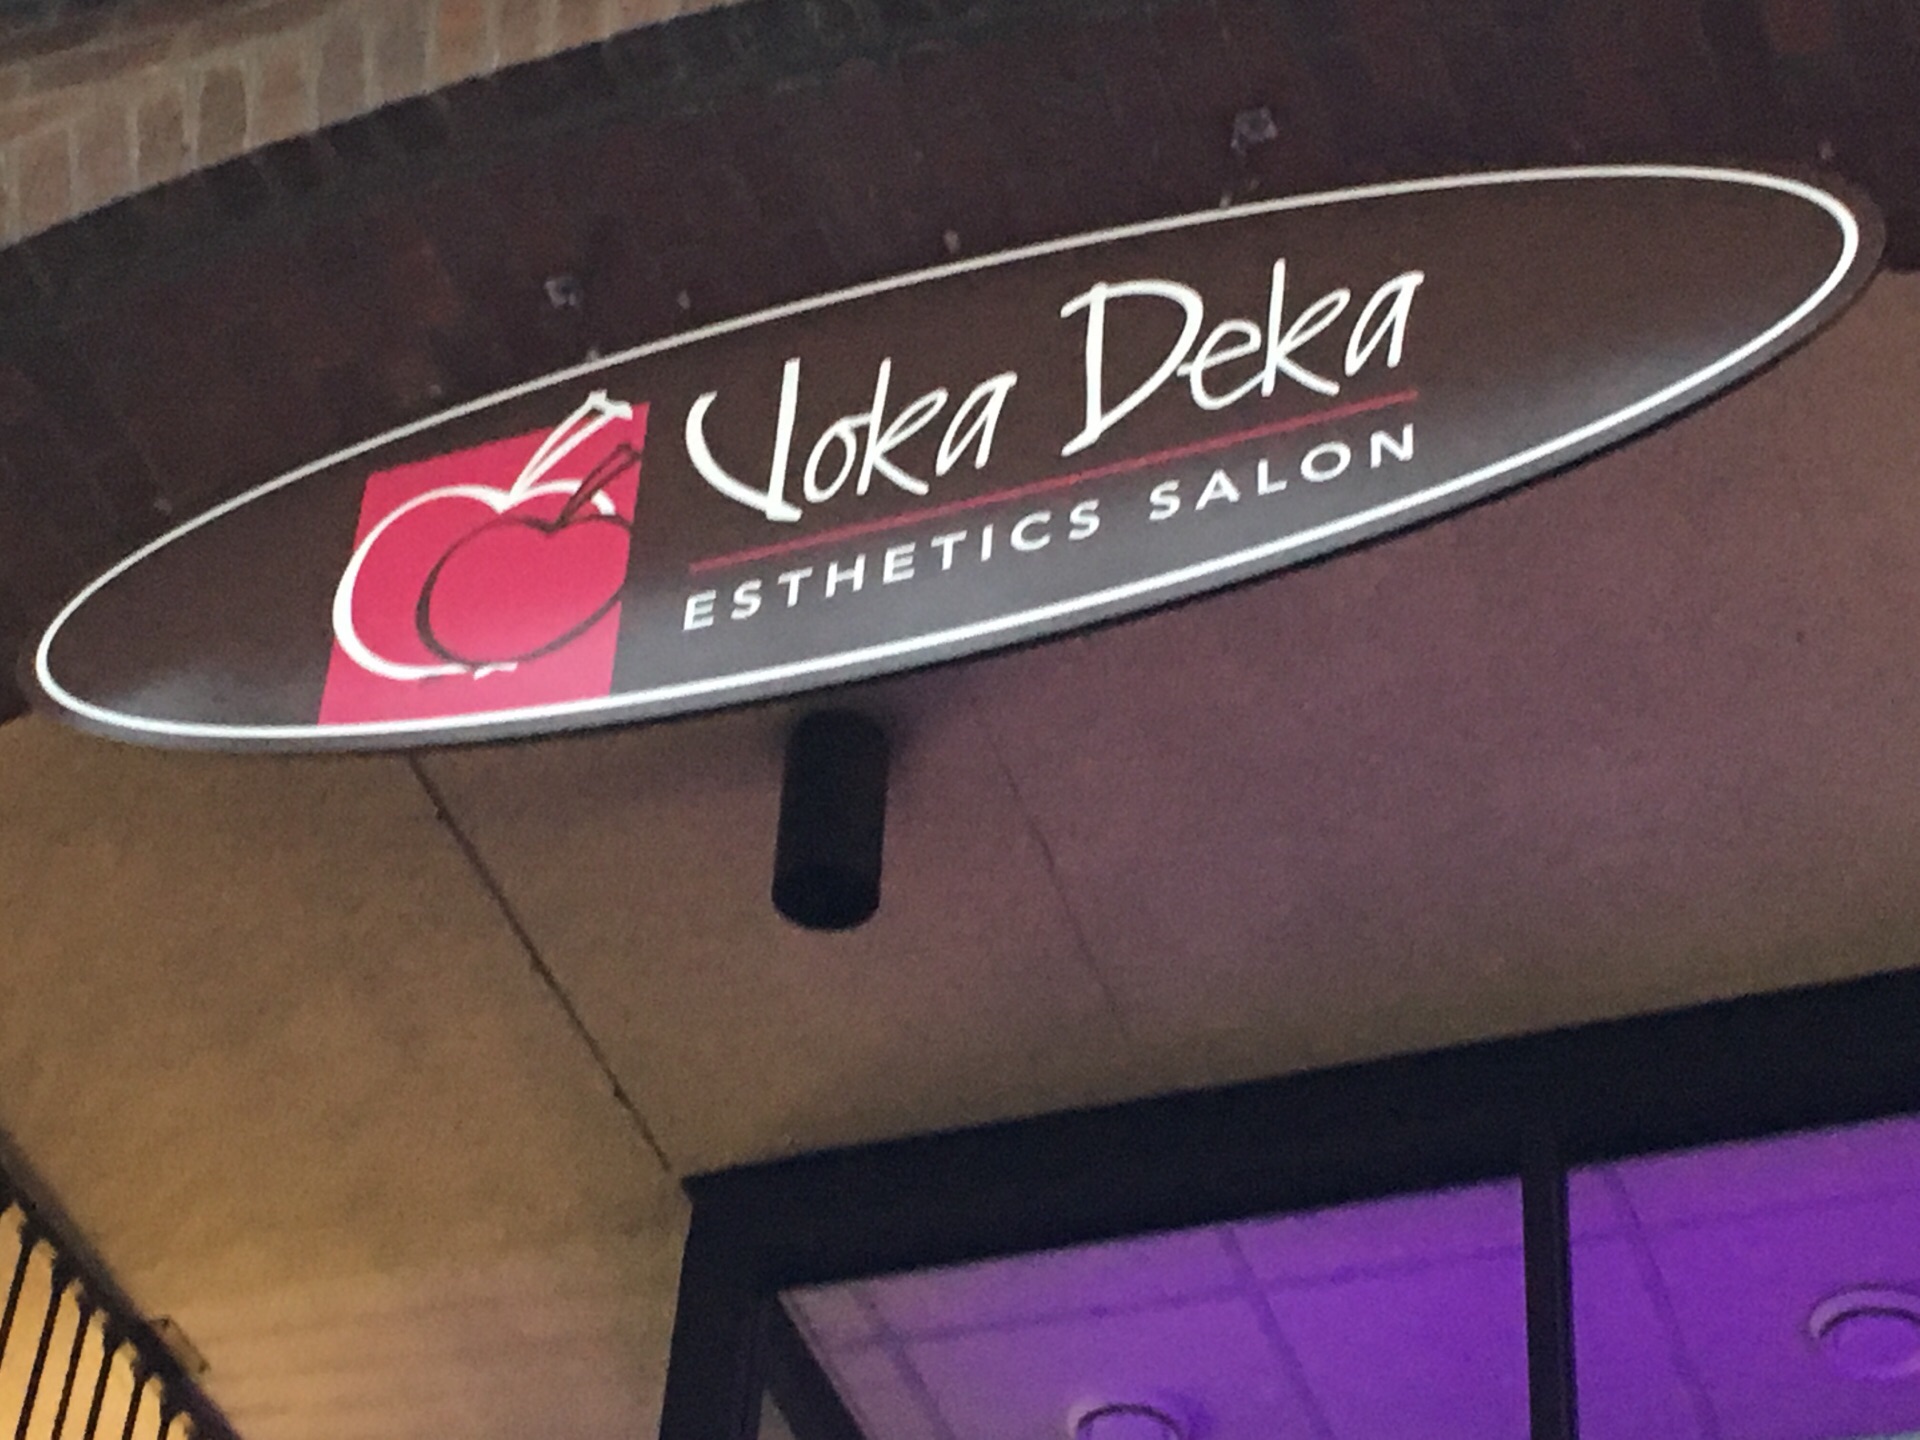 Voka Deka Esthetics Salon attraction reviews - Voka Deka Esthetics Salon  tickets - Voka Deka Esthetics Salon discounts - Voka Deka Esthetics Salon  transportation, address, opening hours - attractions, hotels, and food